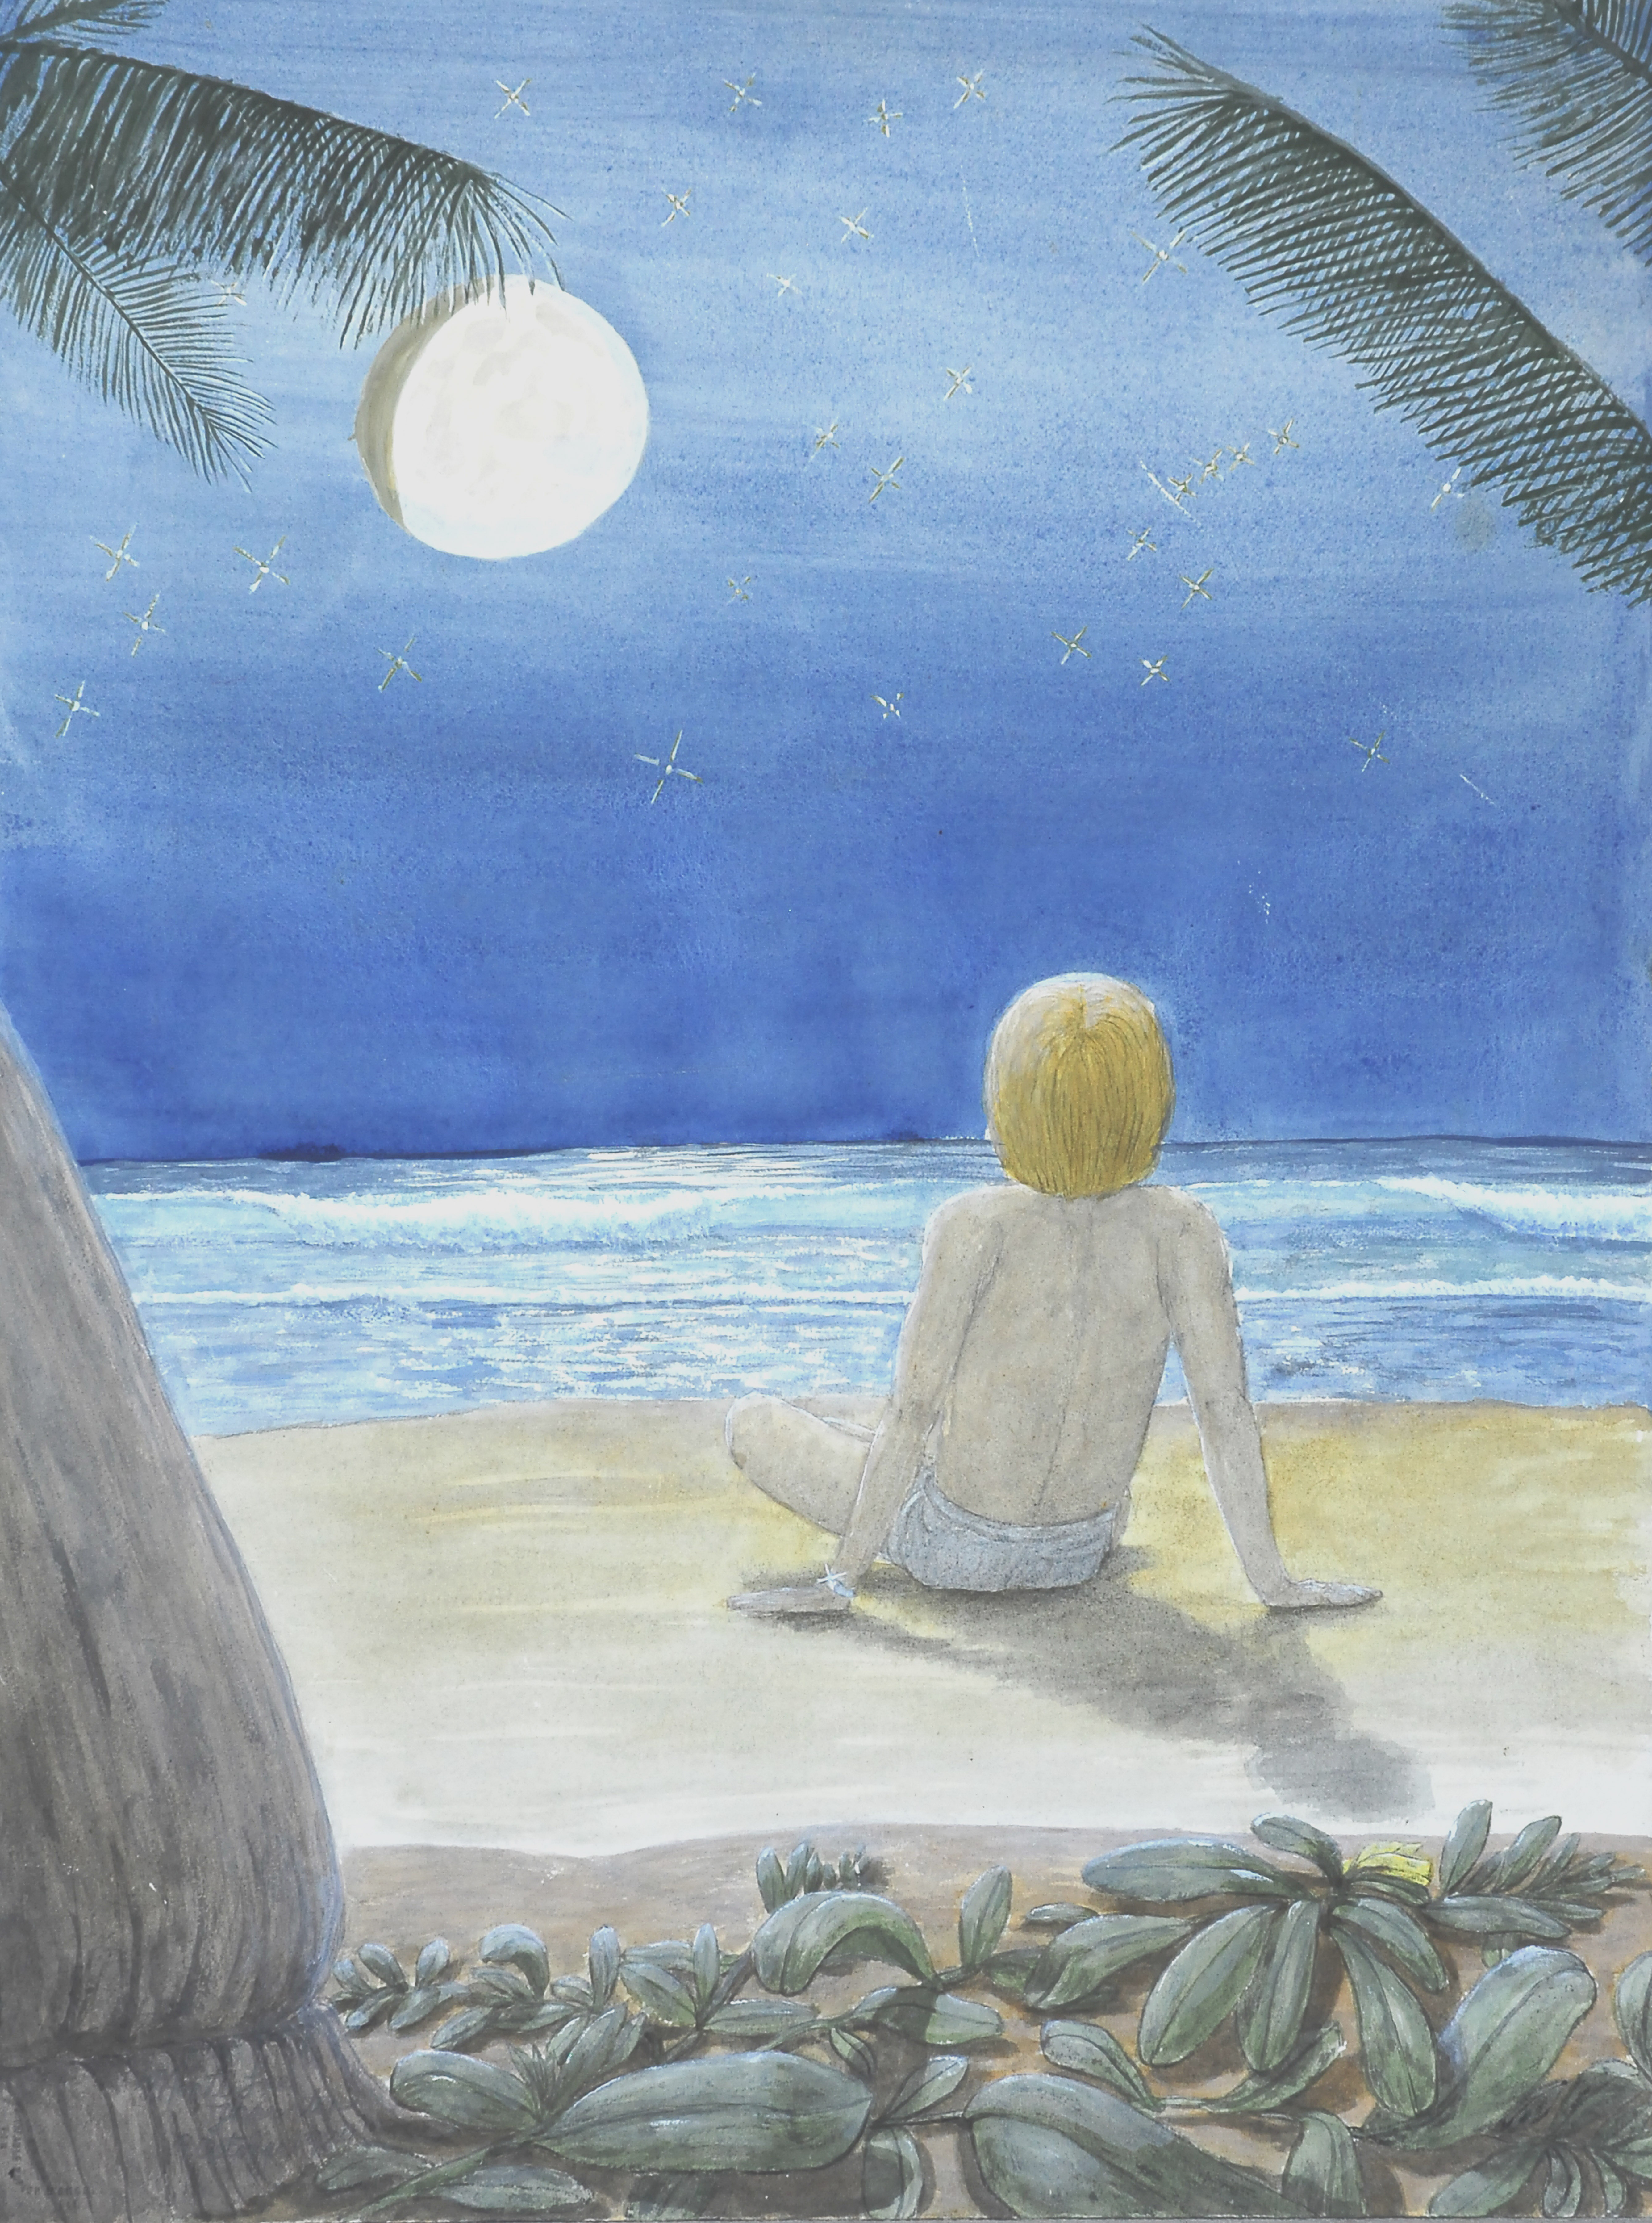 Memories of sitting on the North Shore as the Moon came up Hawaii, 24x36" $4760 by Monte Thornton